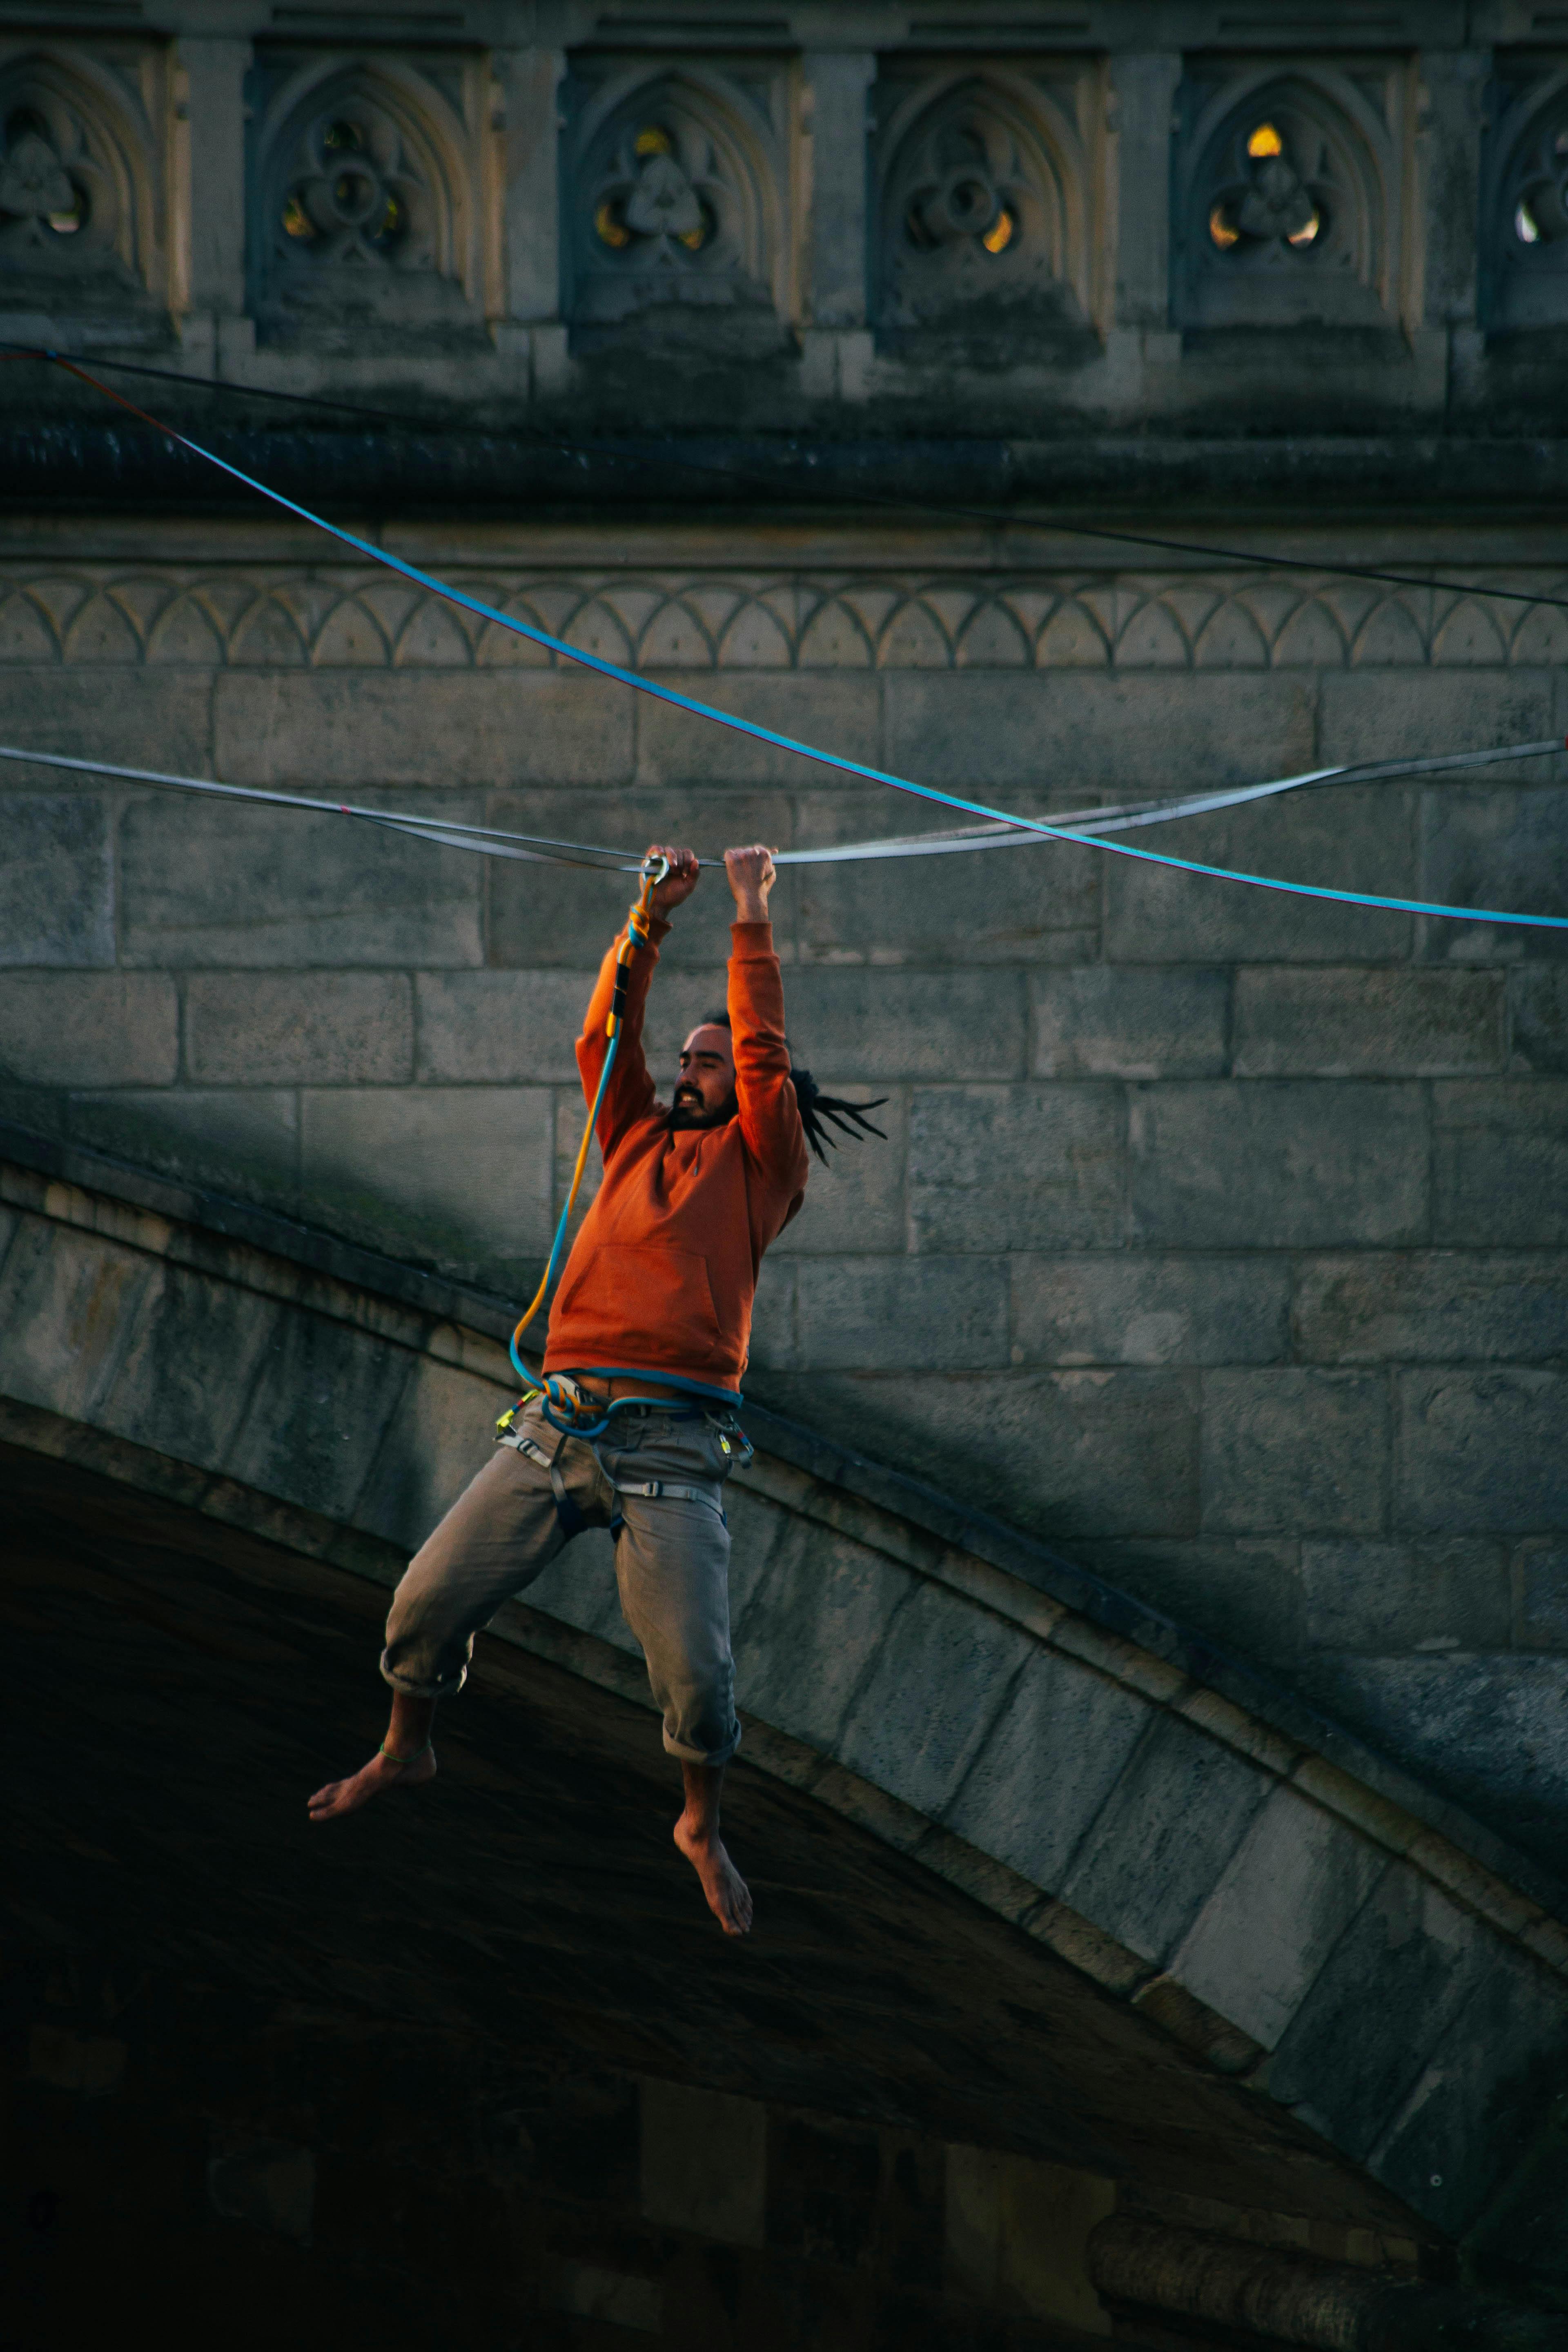 Man Hanging from Rope by Bridge · Free Stock Photo